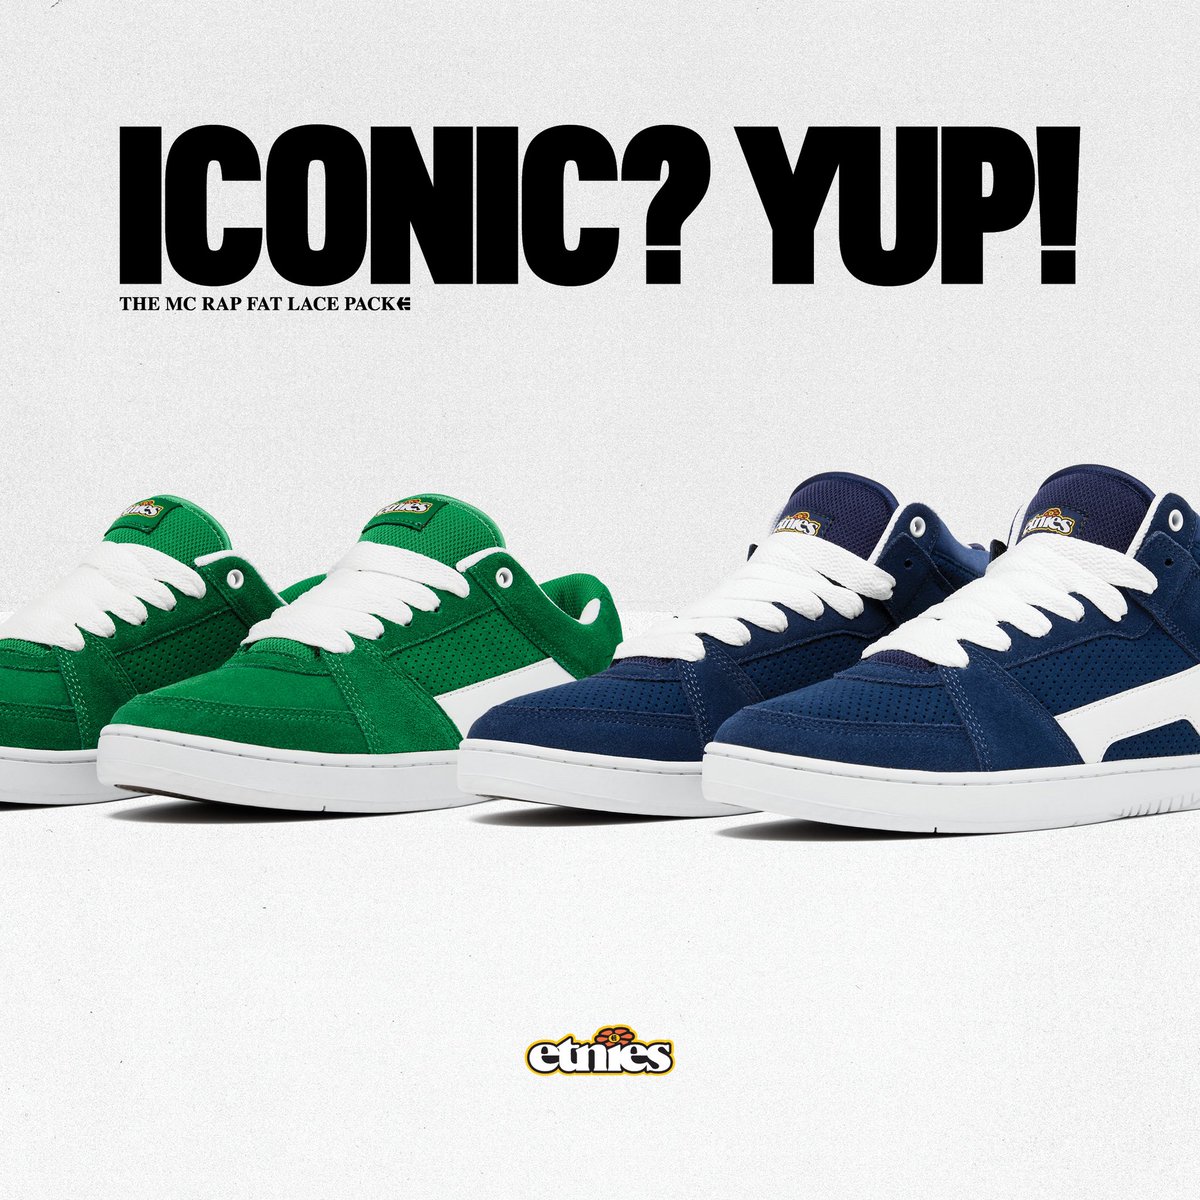 Green or navy? Lo or Hi? MC Rap fat lace pack out now. #etnies #skatetwitter